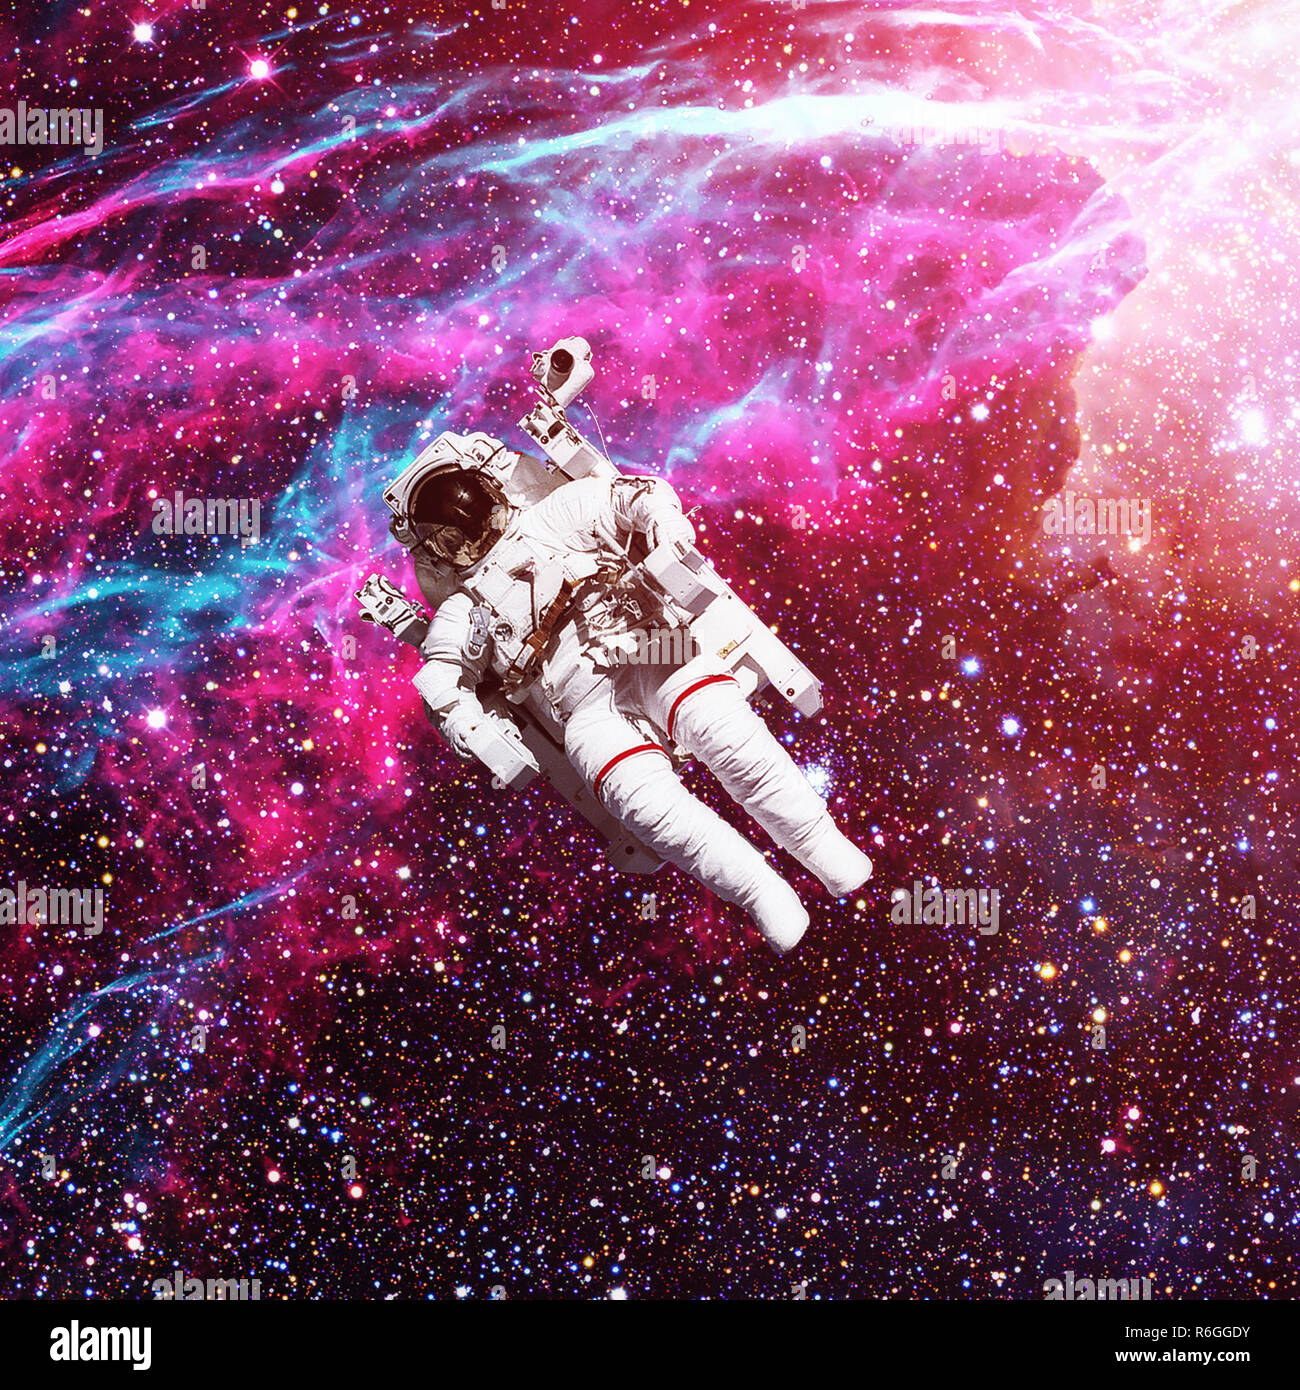 Astronaut in outer space. Nebula on the background. Stock Photo